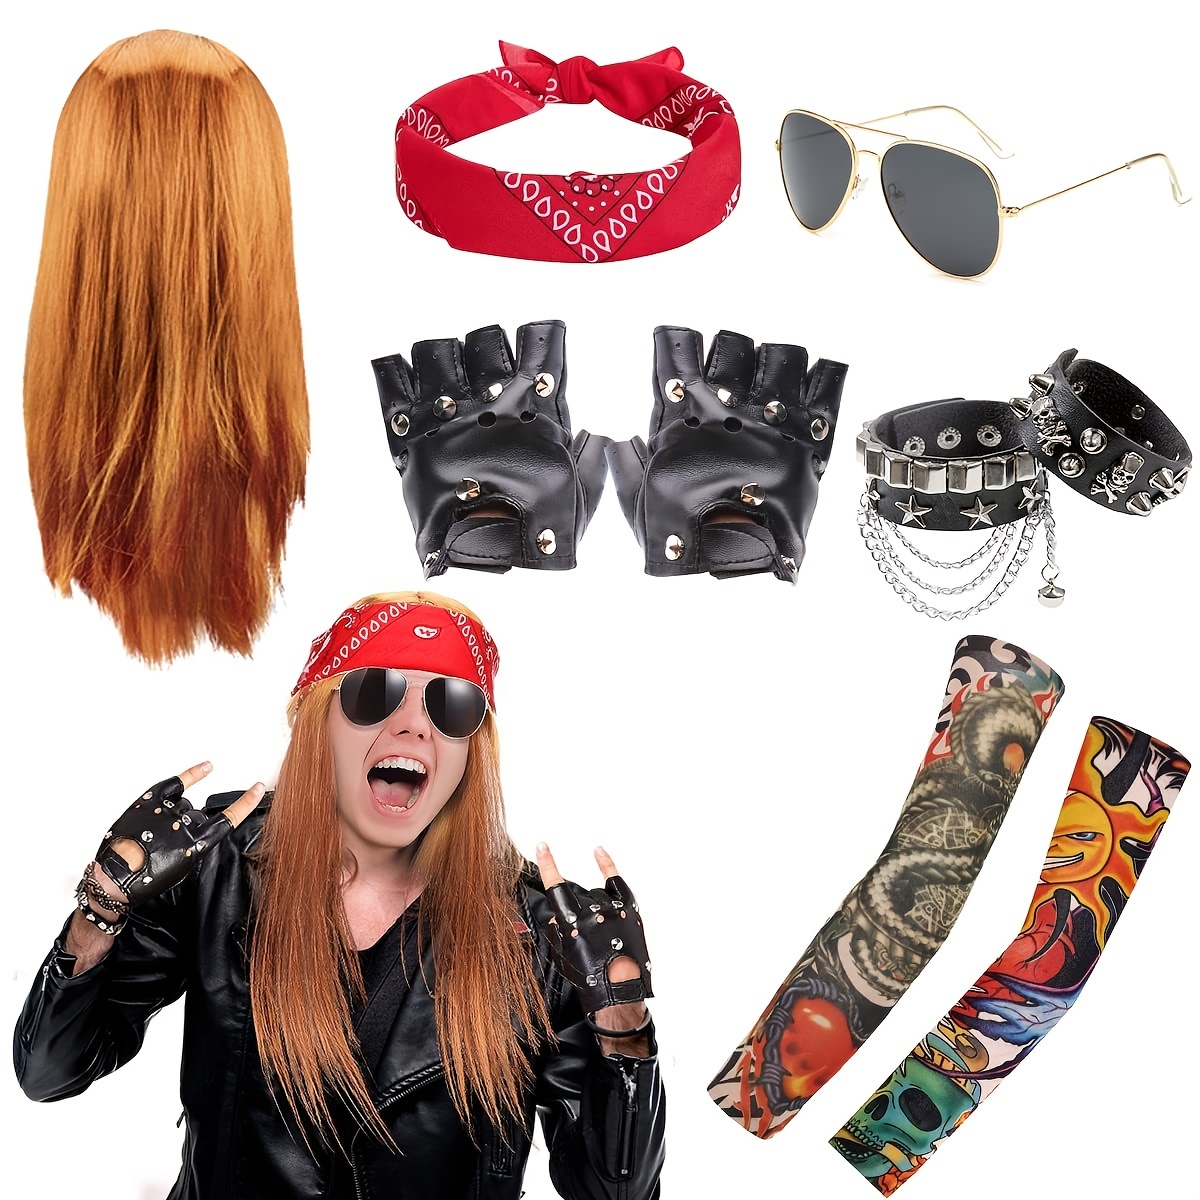  80s Costumes for Women and Kids, Plus Size 80s Halloween  Costumes Set with Accessories Tutu, 1980s Rock Star Outfit for Girls : Toys  & Games